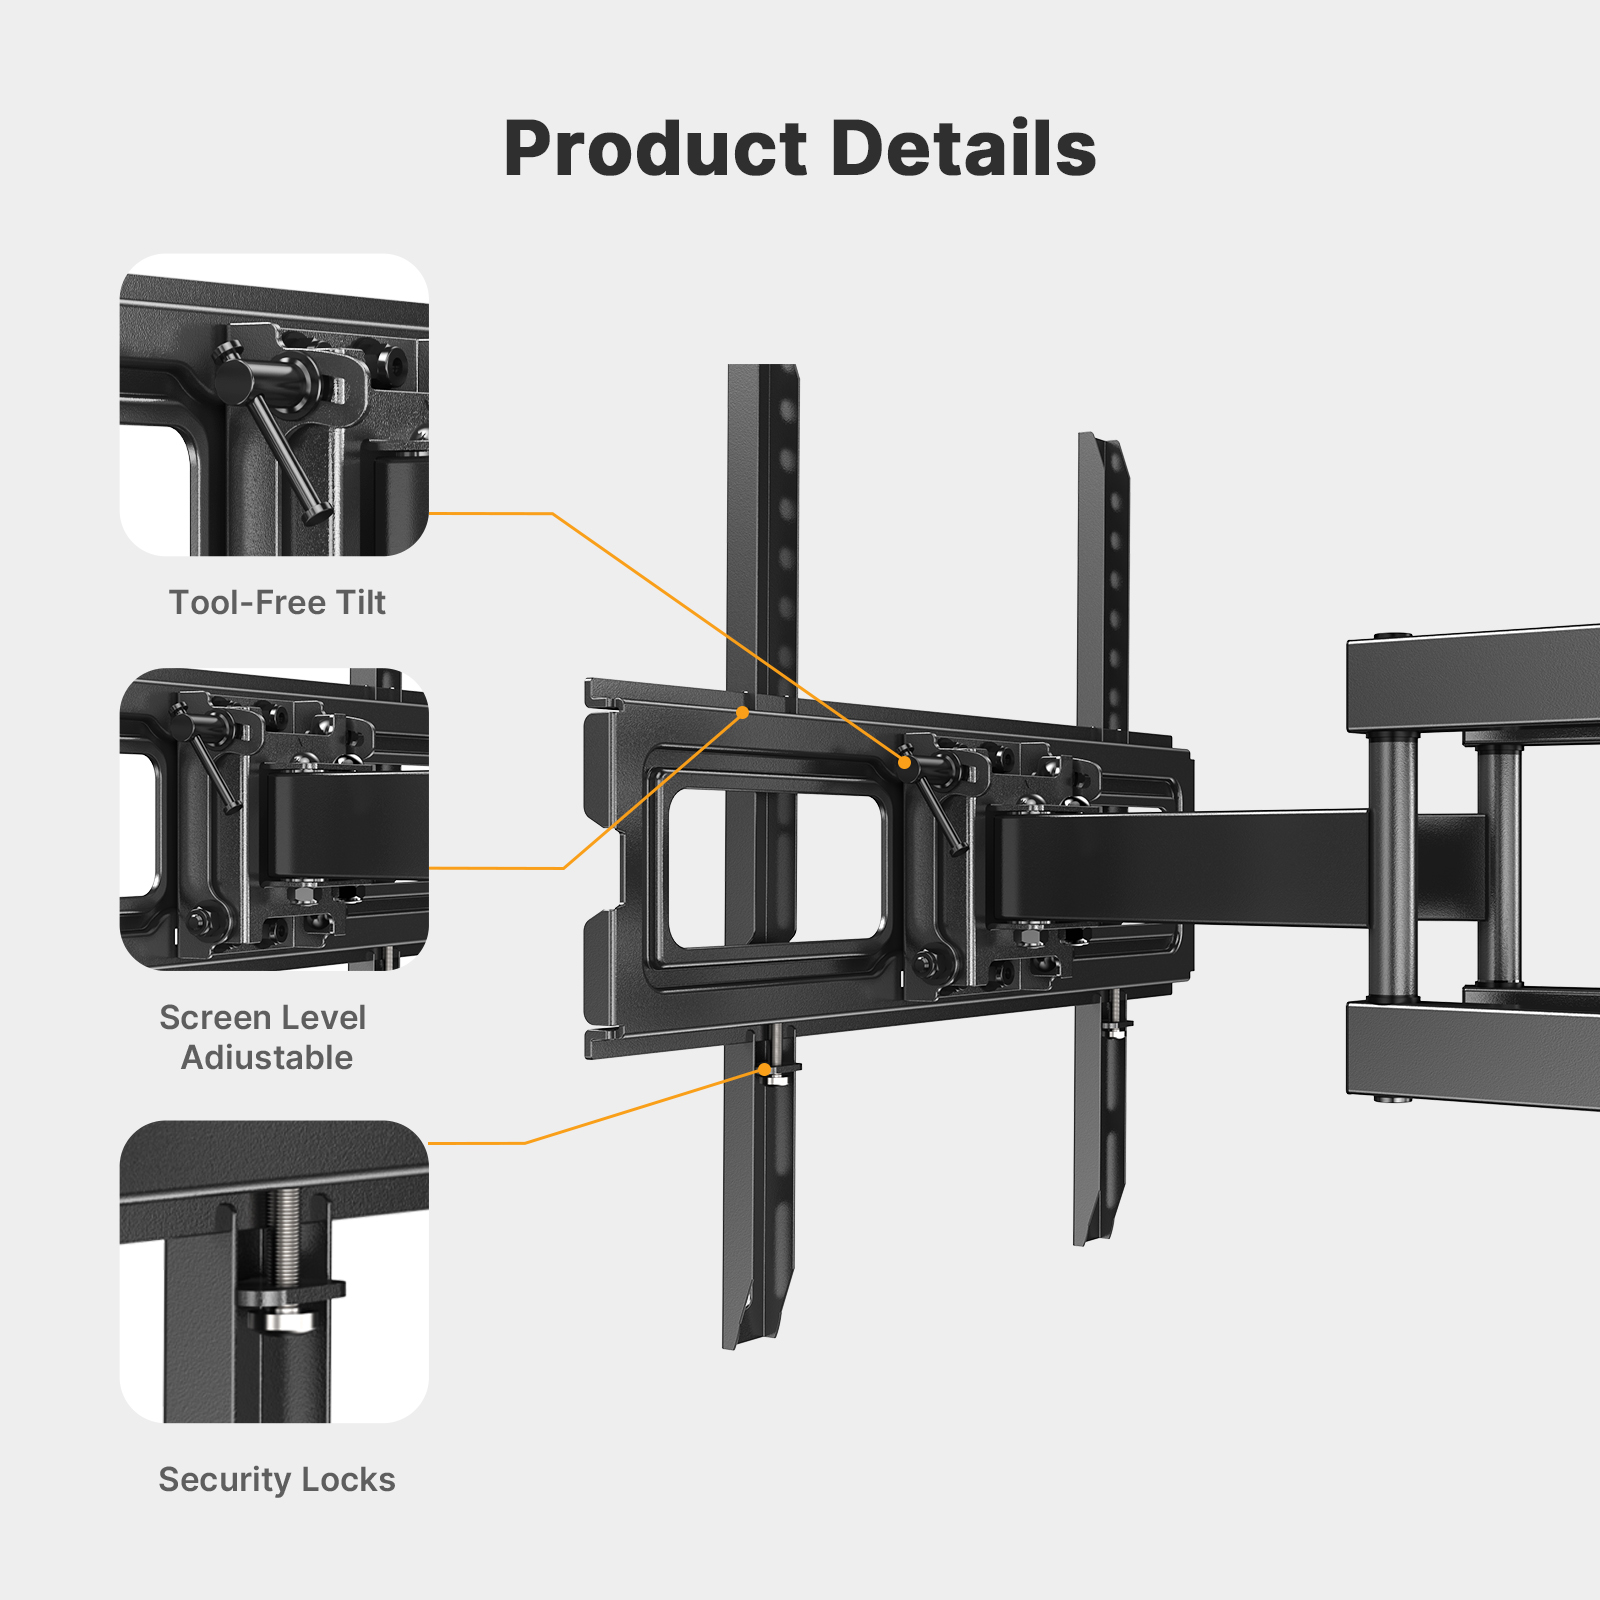 Full Motion Articulating TV Wall Mount  Swivel Tilting Bracket Fit for 26-65 In Flat & Curved TVs - image 4 of 8